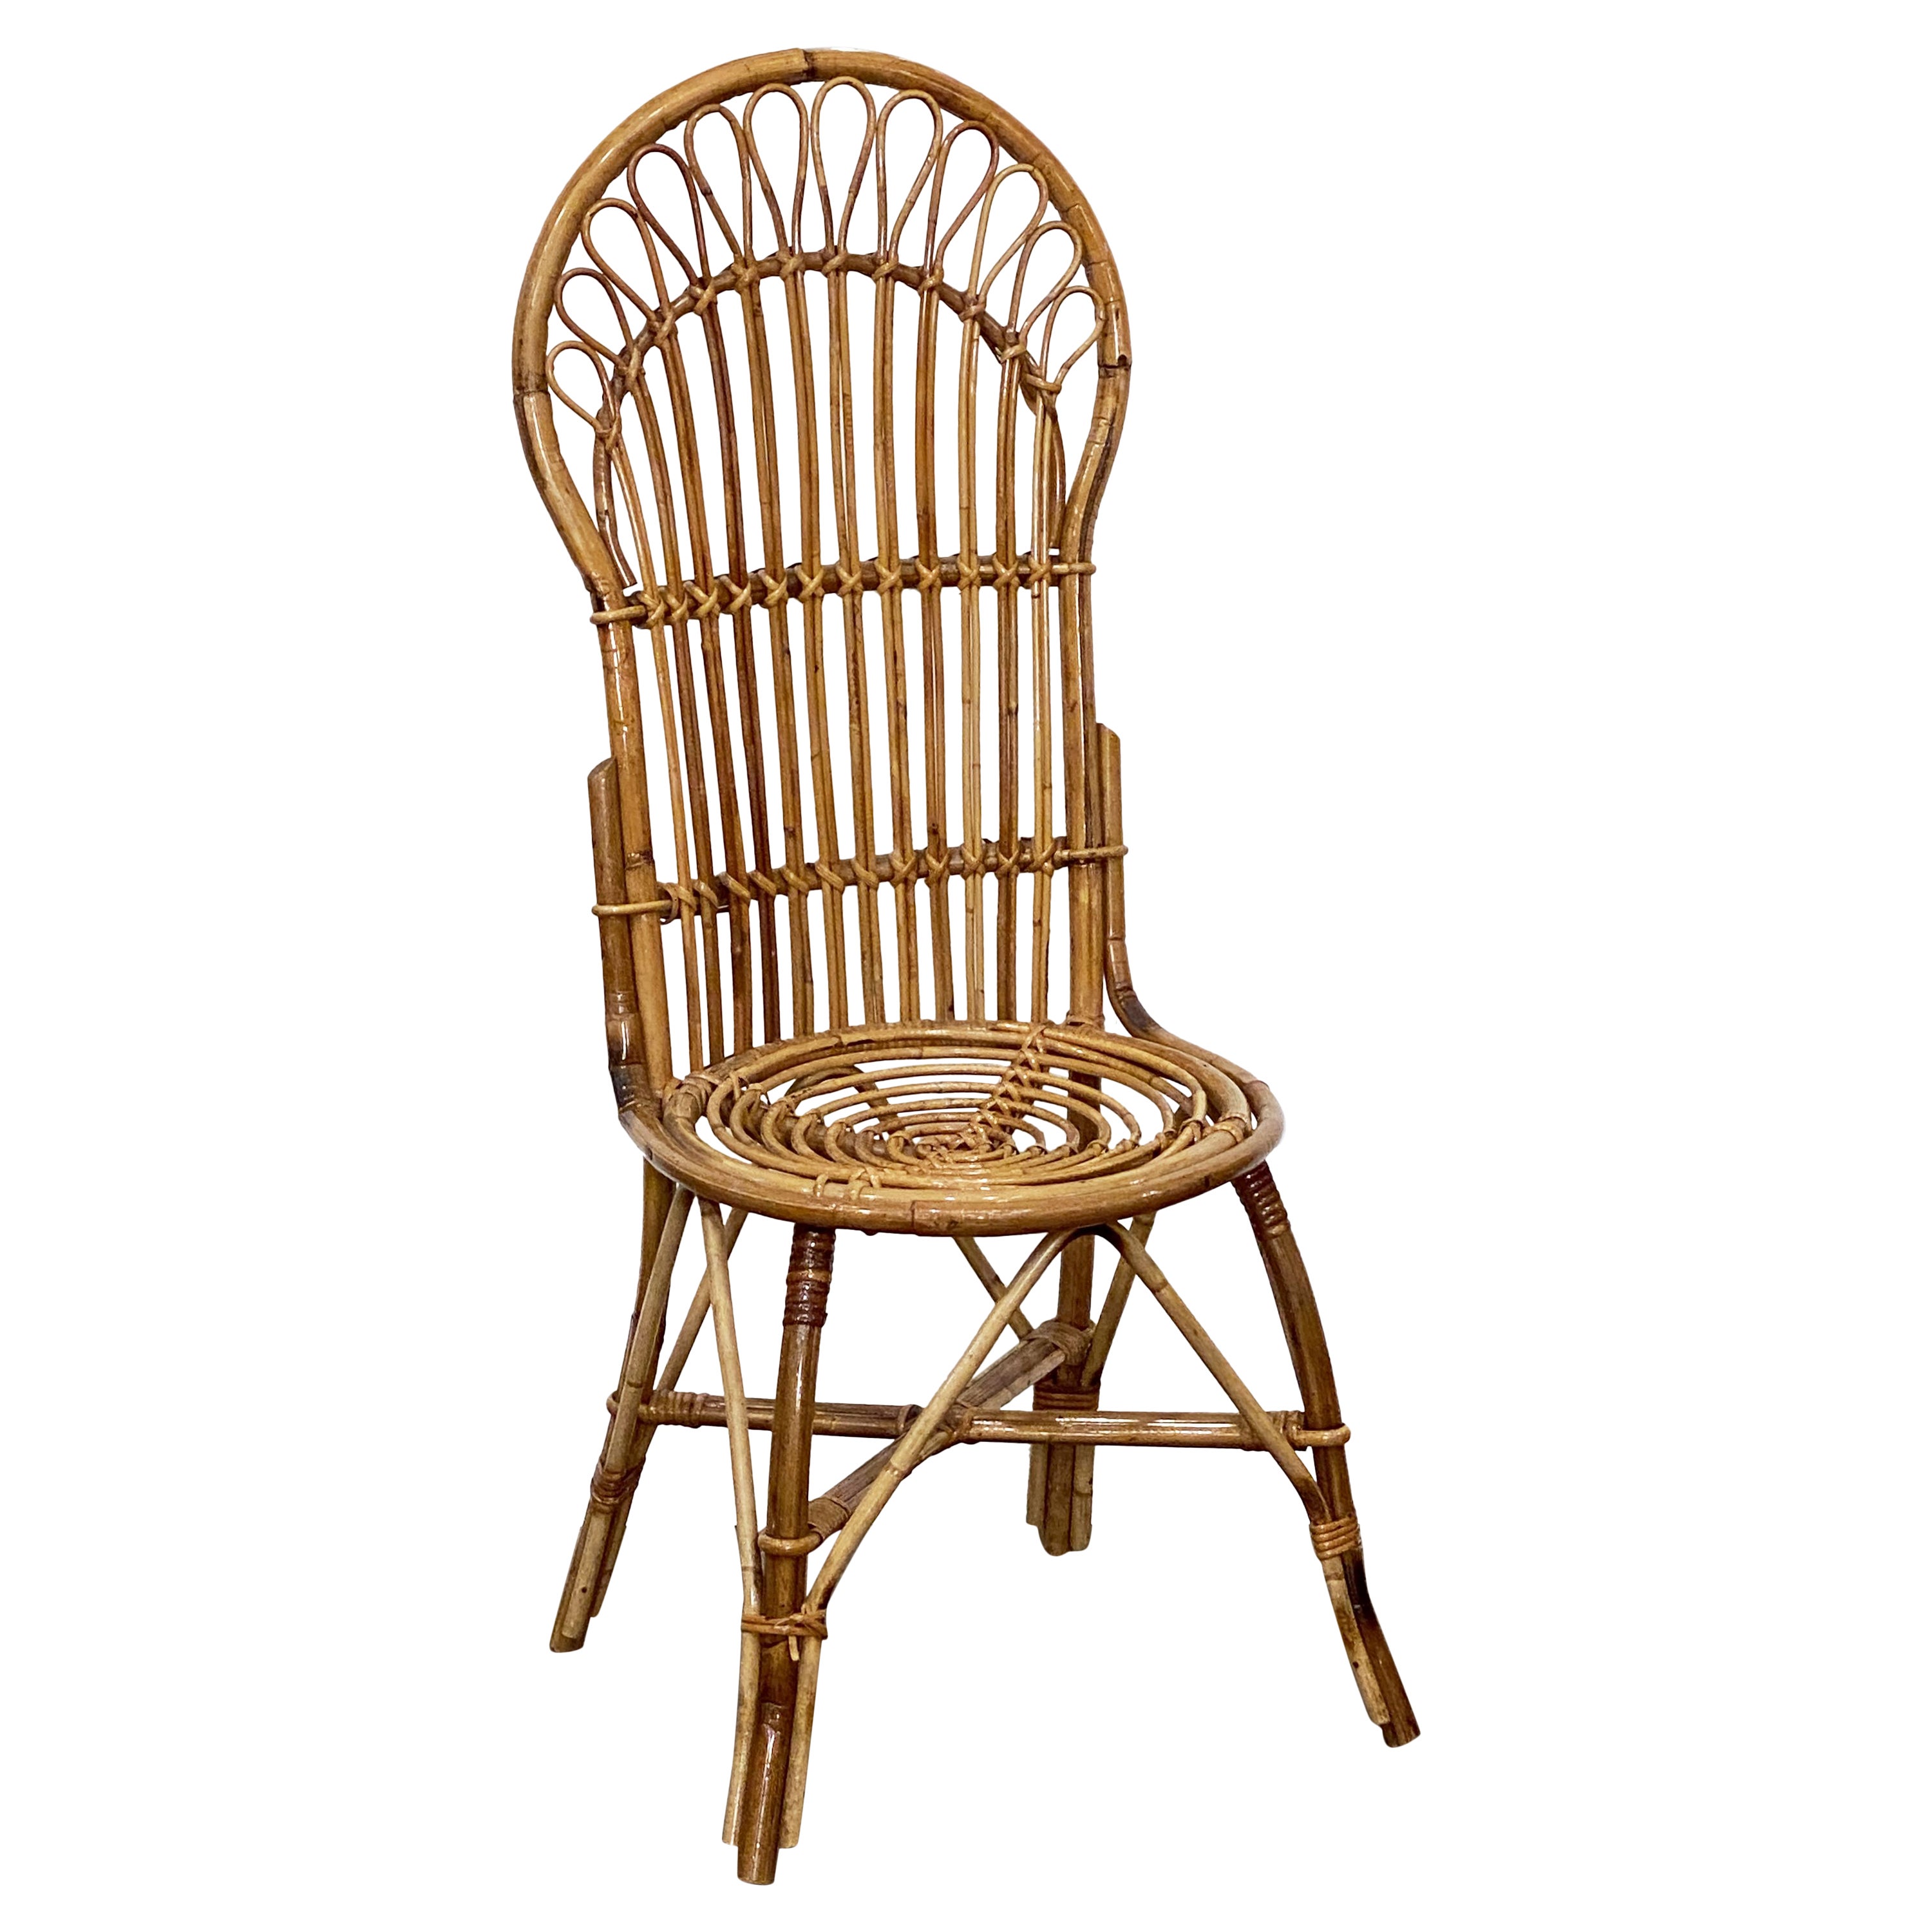 Italian Fan-Backed Chair of Rattan and Bamboo from the Mid-20th Century For Sale